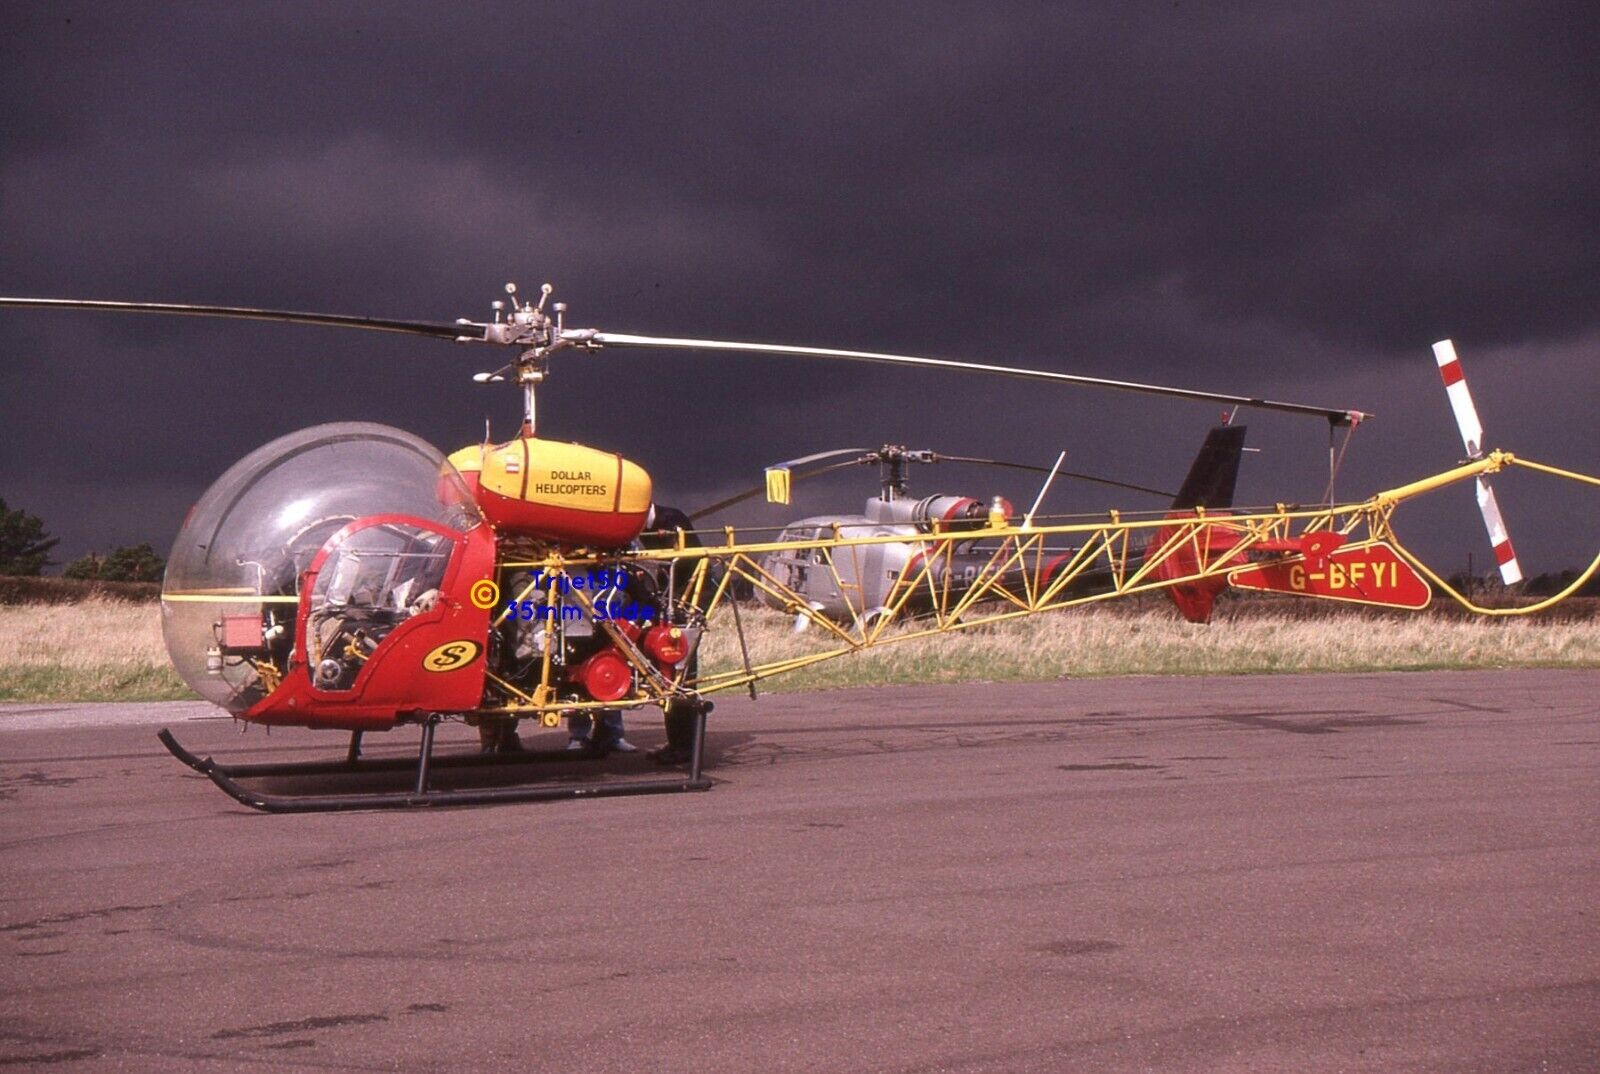 35mm Slide Bell 47 G-BFYI Dollar Helicopters 1988 PRM1199